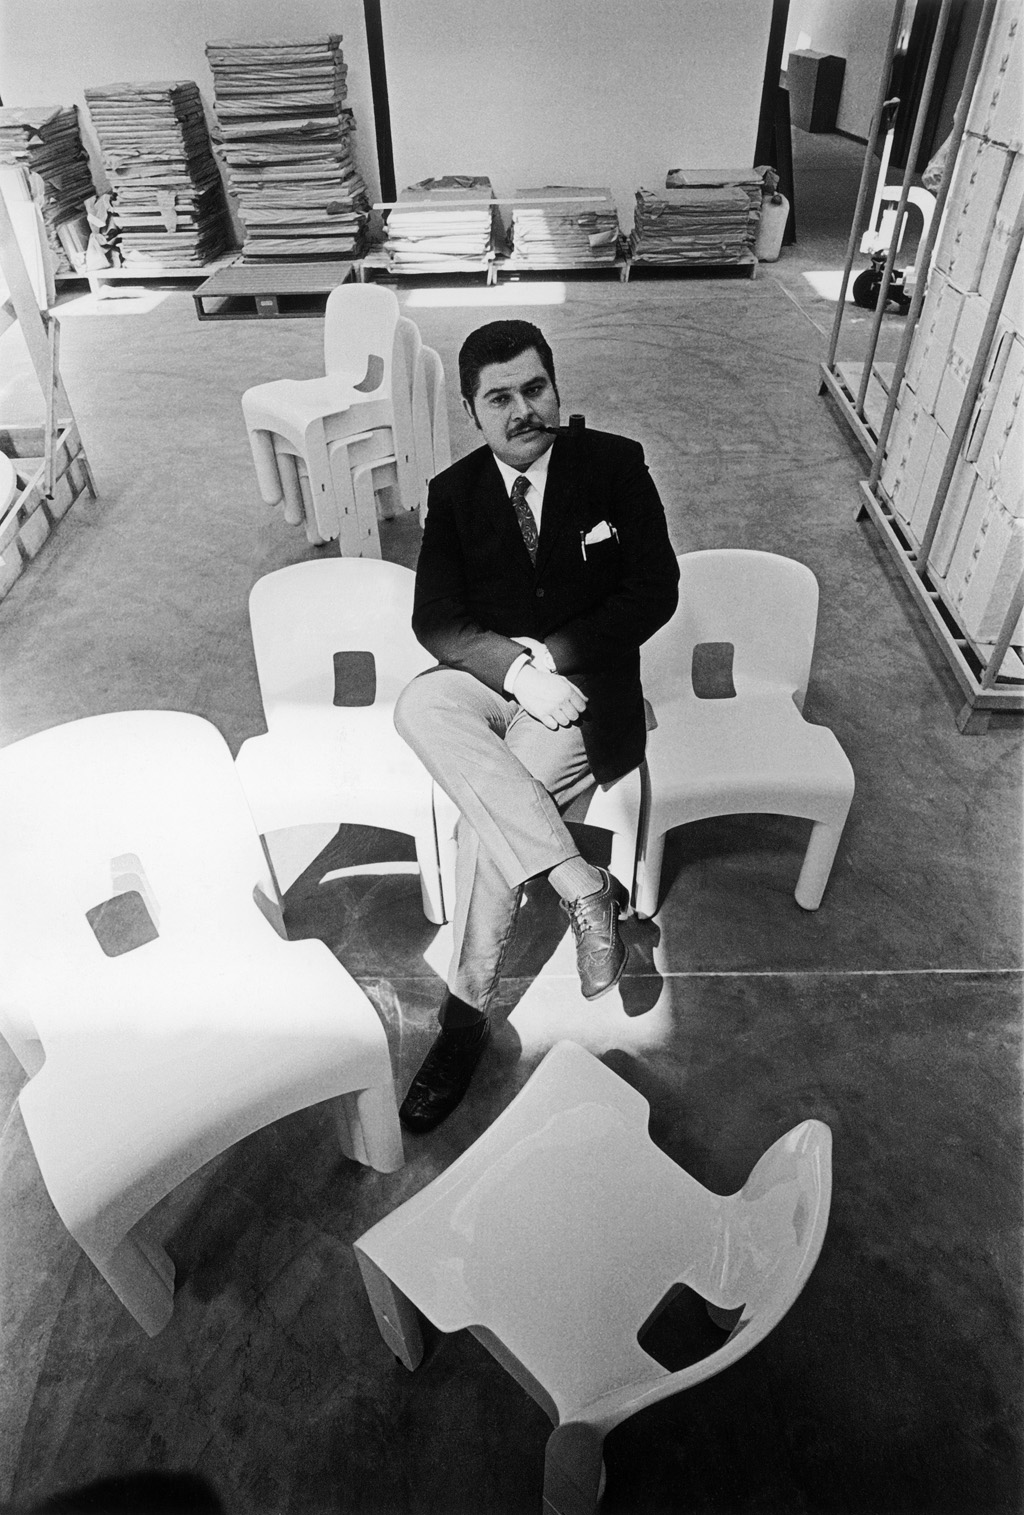 Joe Colombo and his Universale chair for Kartell. Not a Qu'est-ce que le design? exhibition photo, but Joe Colombo and his Universale chair for Kartell. Not a Qu'est-ce que le design? exhibition photo, but both featured....both feaatured